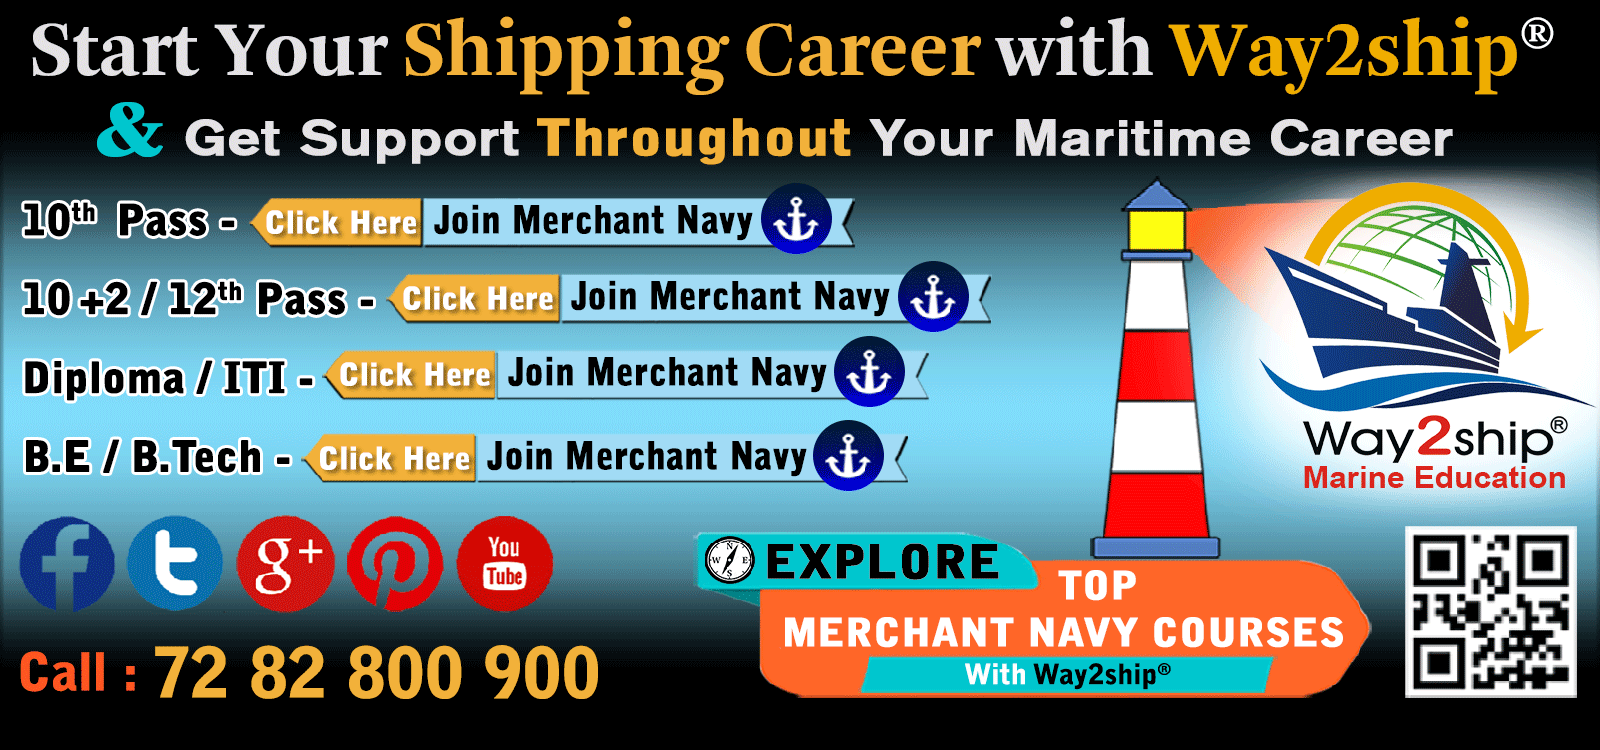 join merchant navy after 12th, merchant navy after12th 